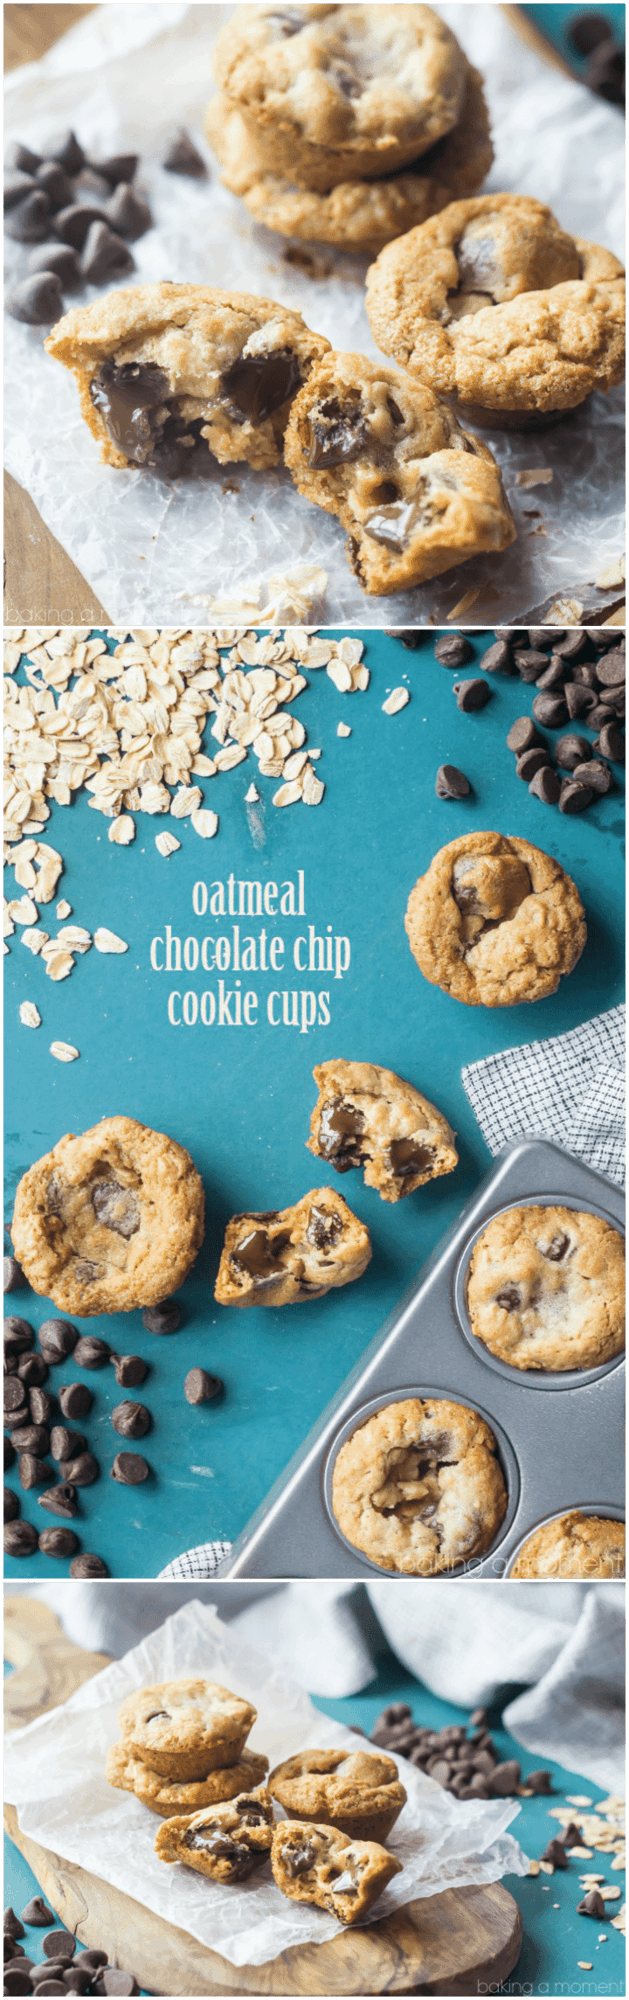 Oatmeal Chocolate Chip Cookie Cups- I make these for my kids all the time. So easy & convenient and they LOVE them!